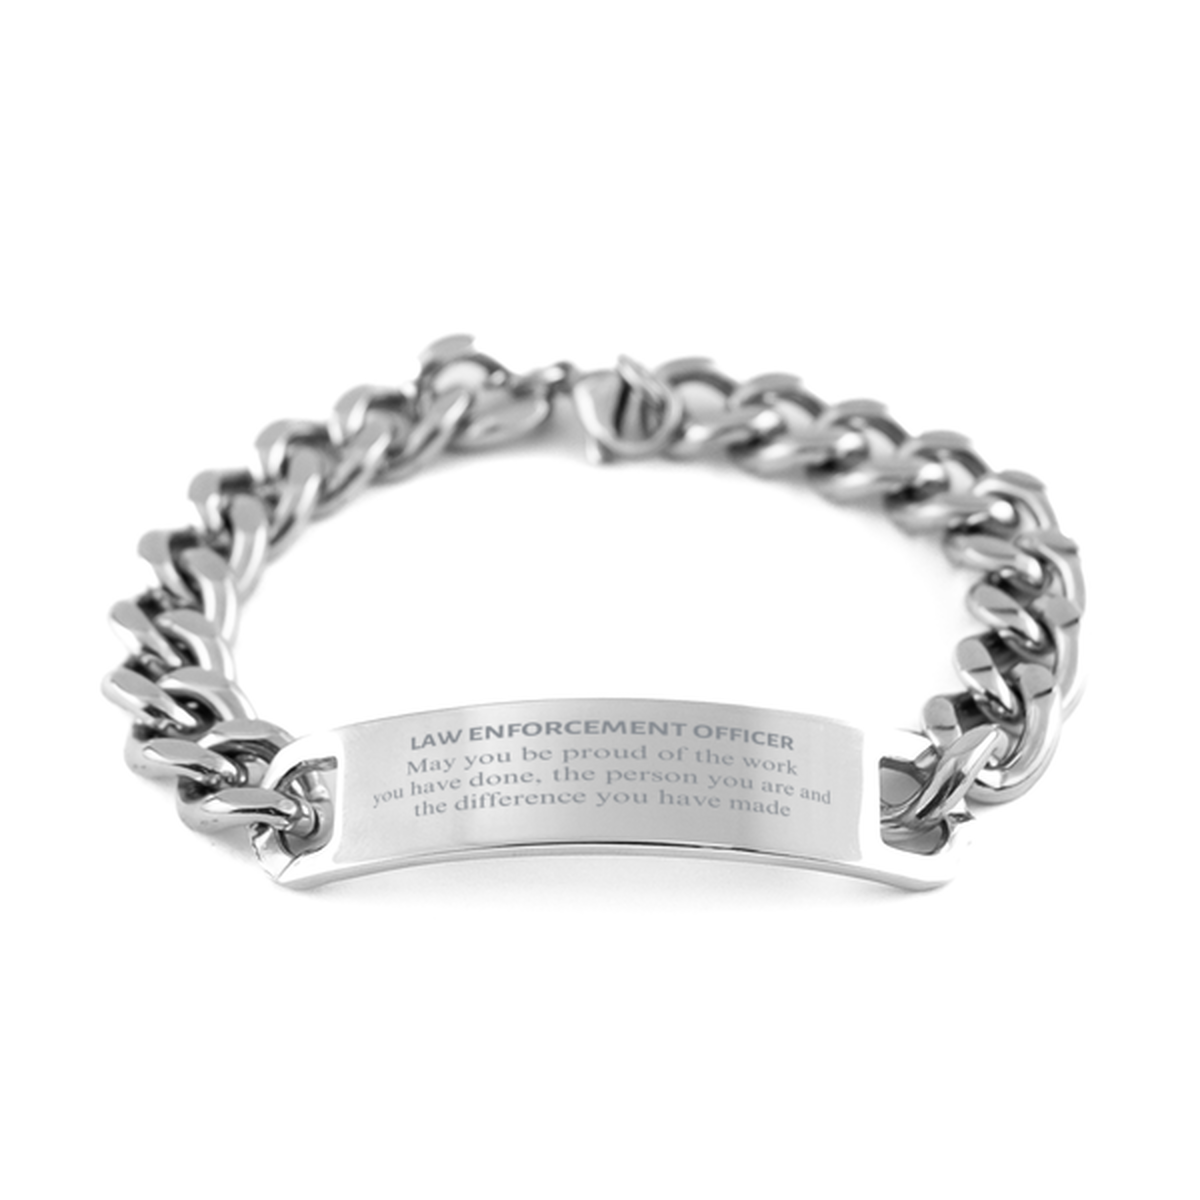 Law Enforcement Officer May you be proud of the work you have done, Retirement Law Enforcement Officer Cuban Chain Stainless Steel Bracelet for Colleague Appreciation Gifts Amazing for Law Enforcement Officer